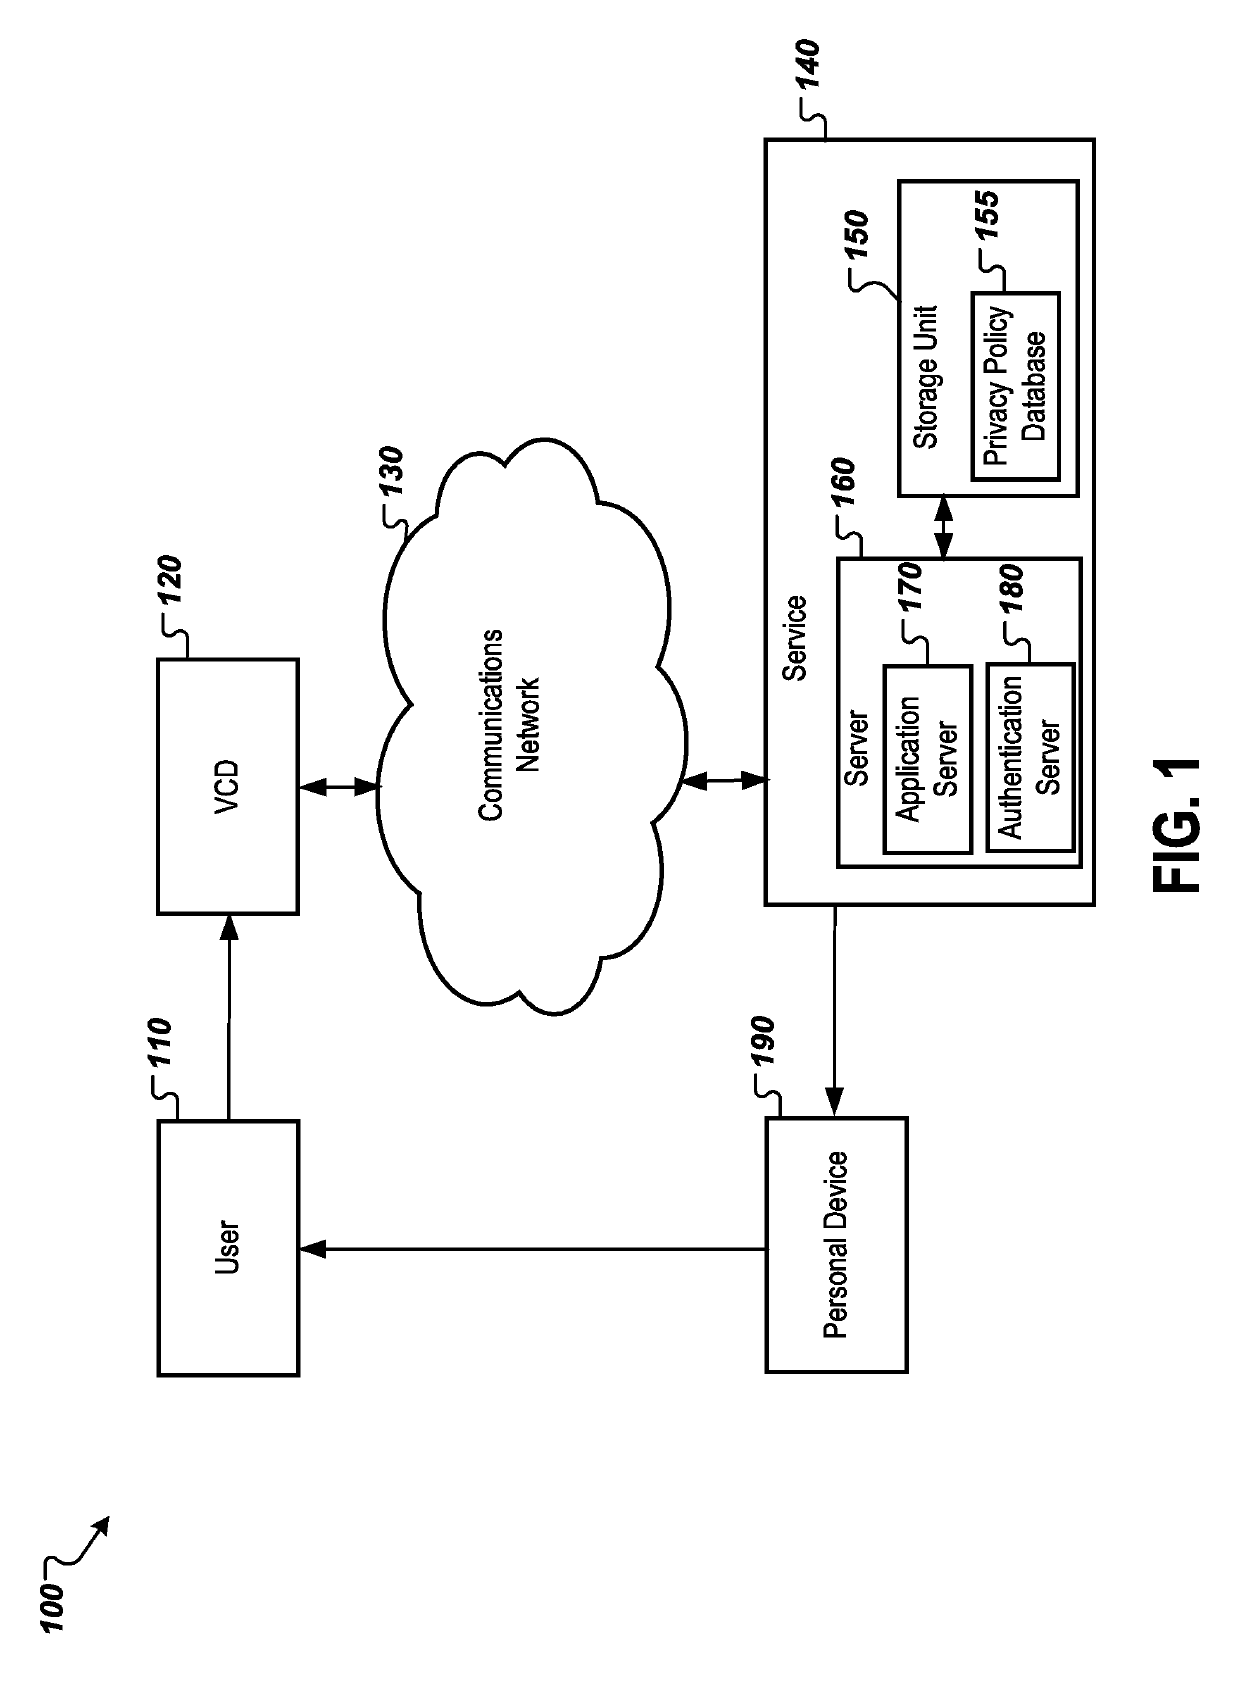 System and method of retrieving and conveying sensitive information when using voice command devices